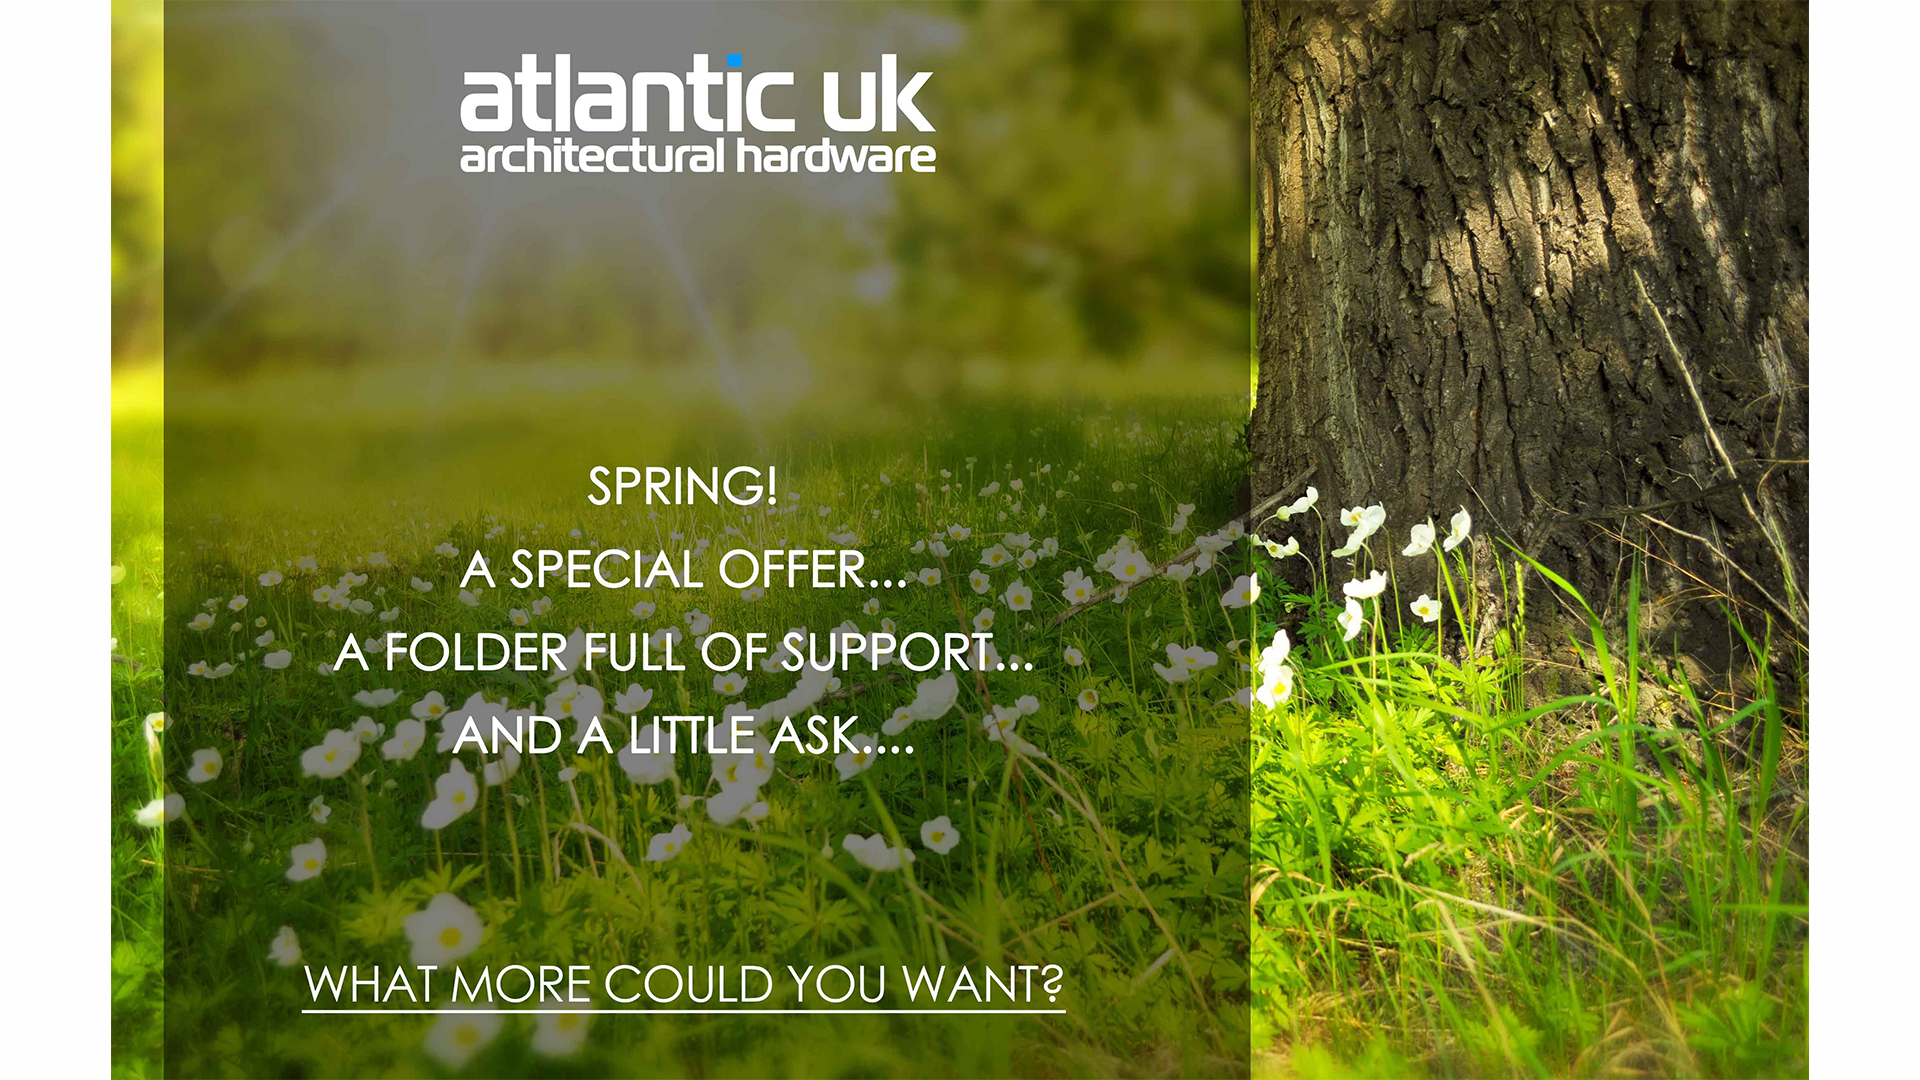 Spring! A Special Offer! A Folder Full of Help.. And Much More!